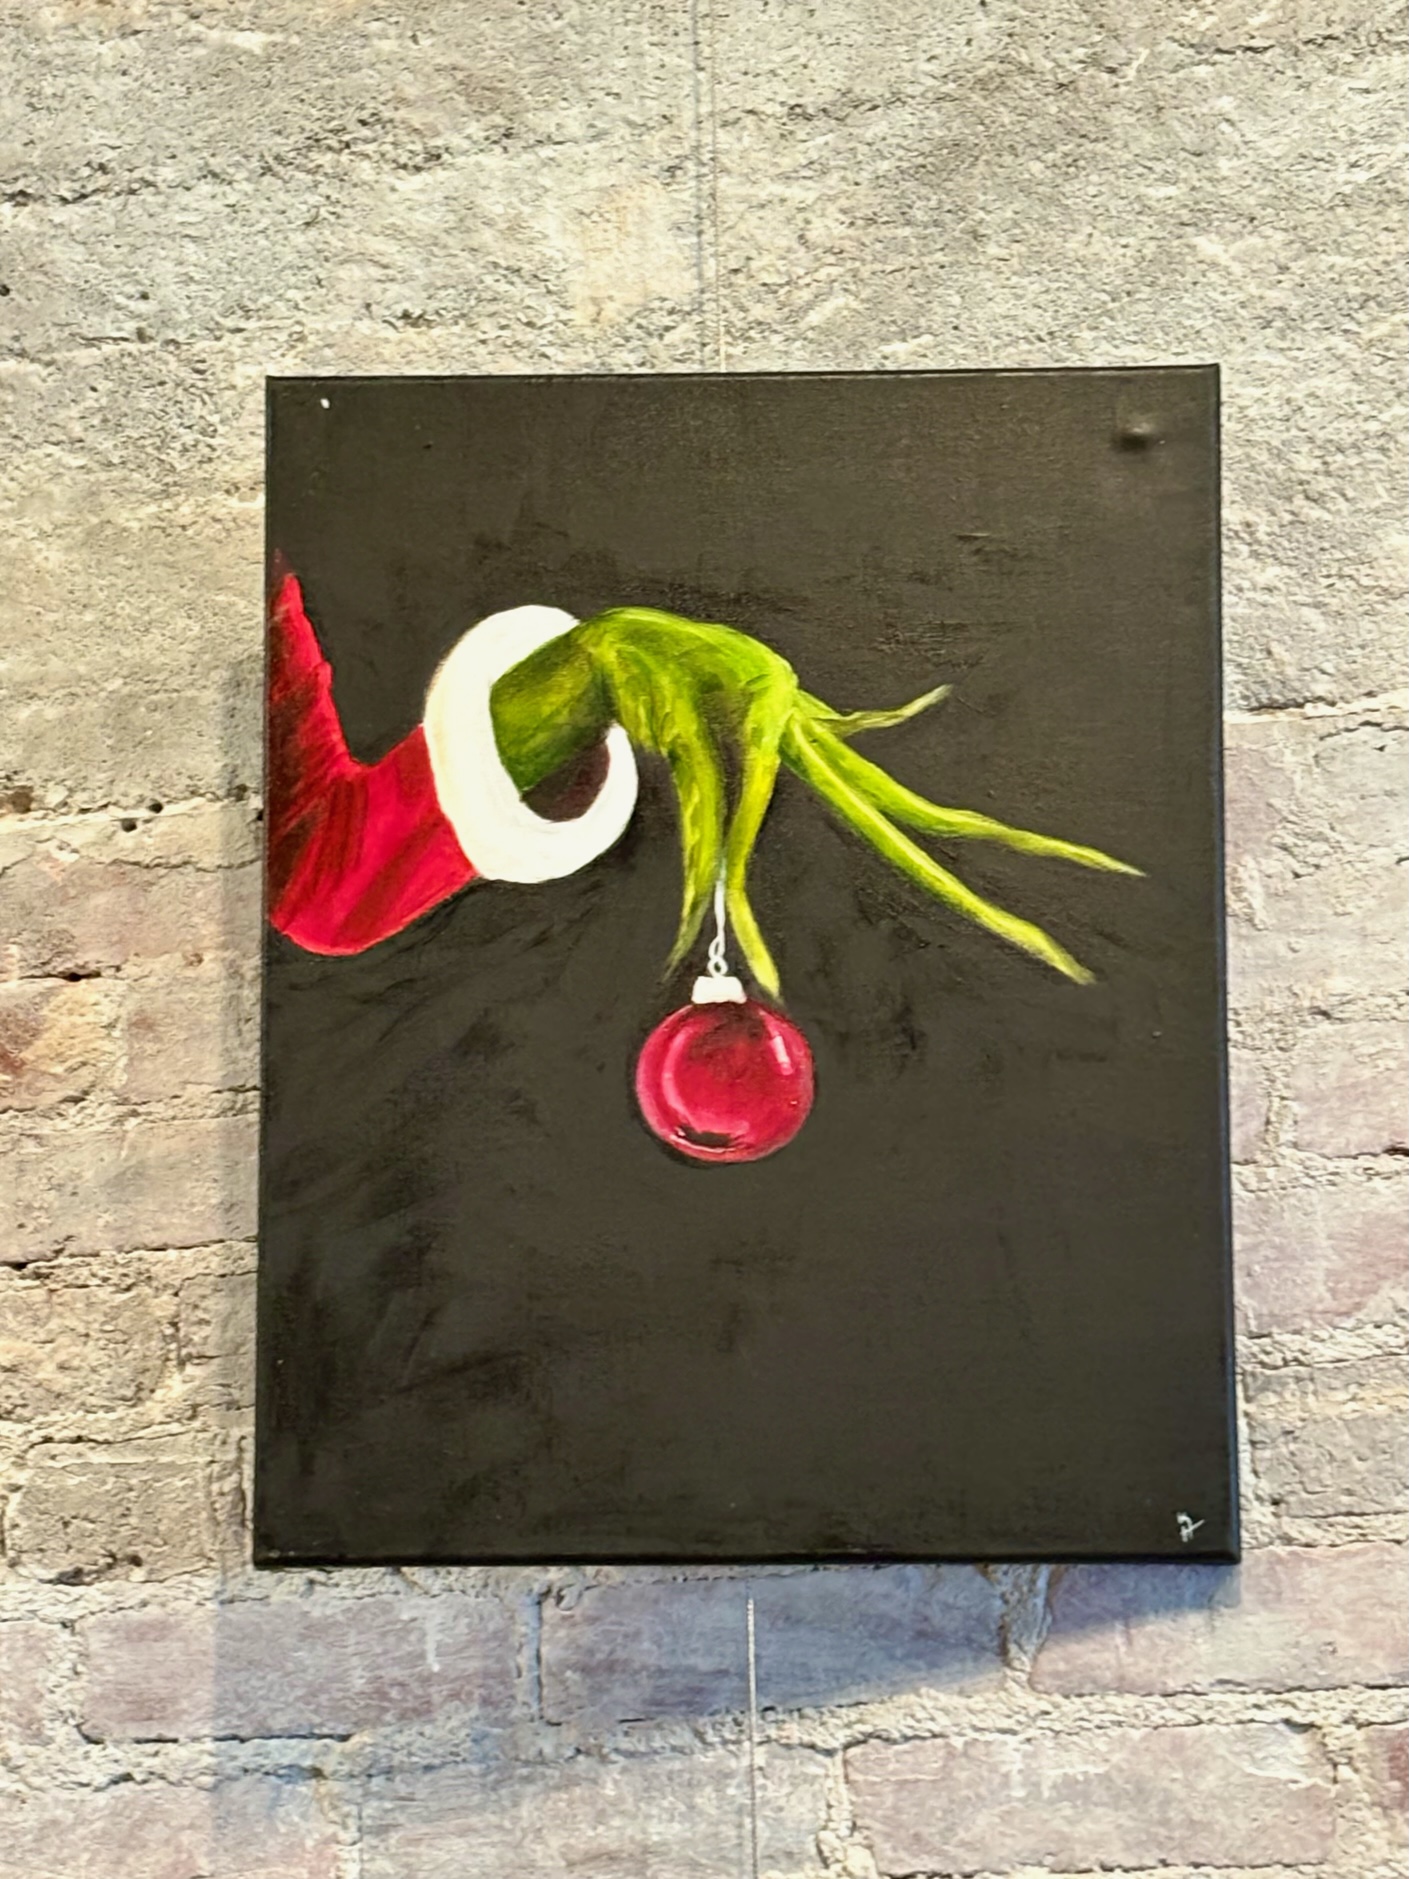 A painting of the Grinch's hand holding an ornament